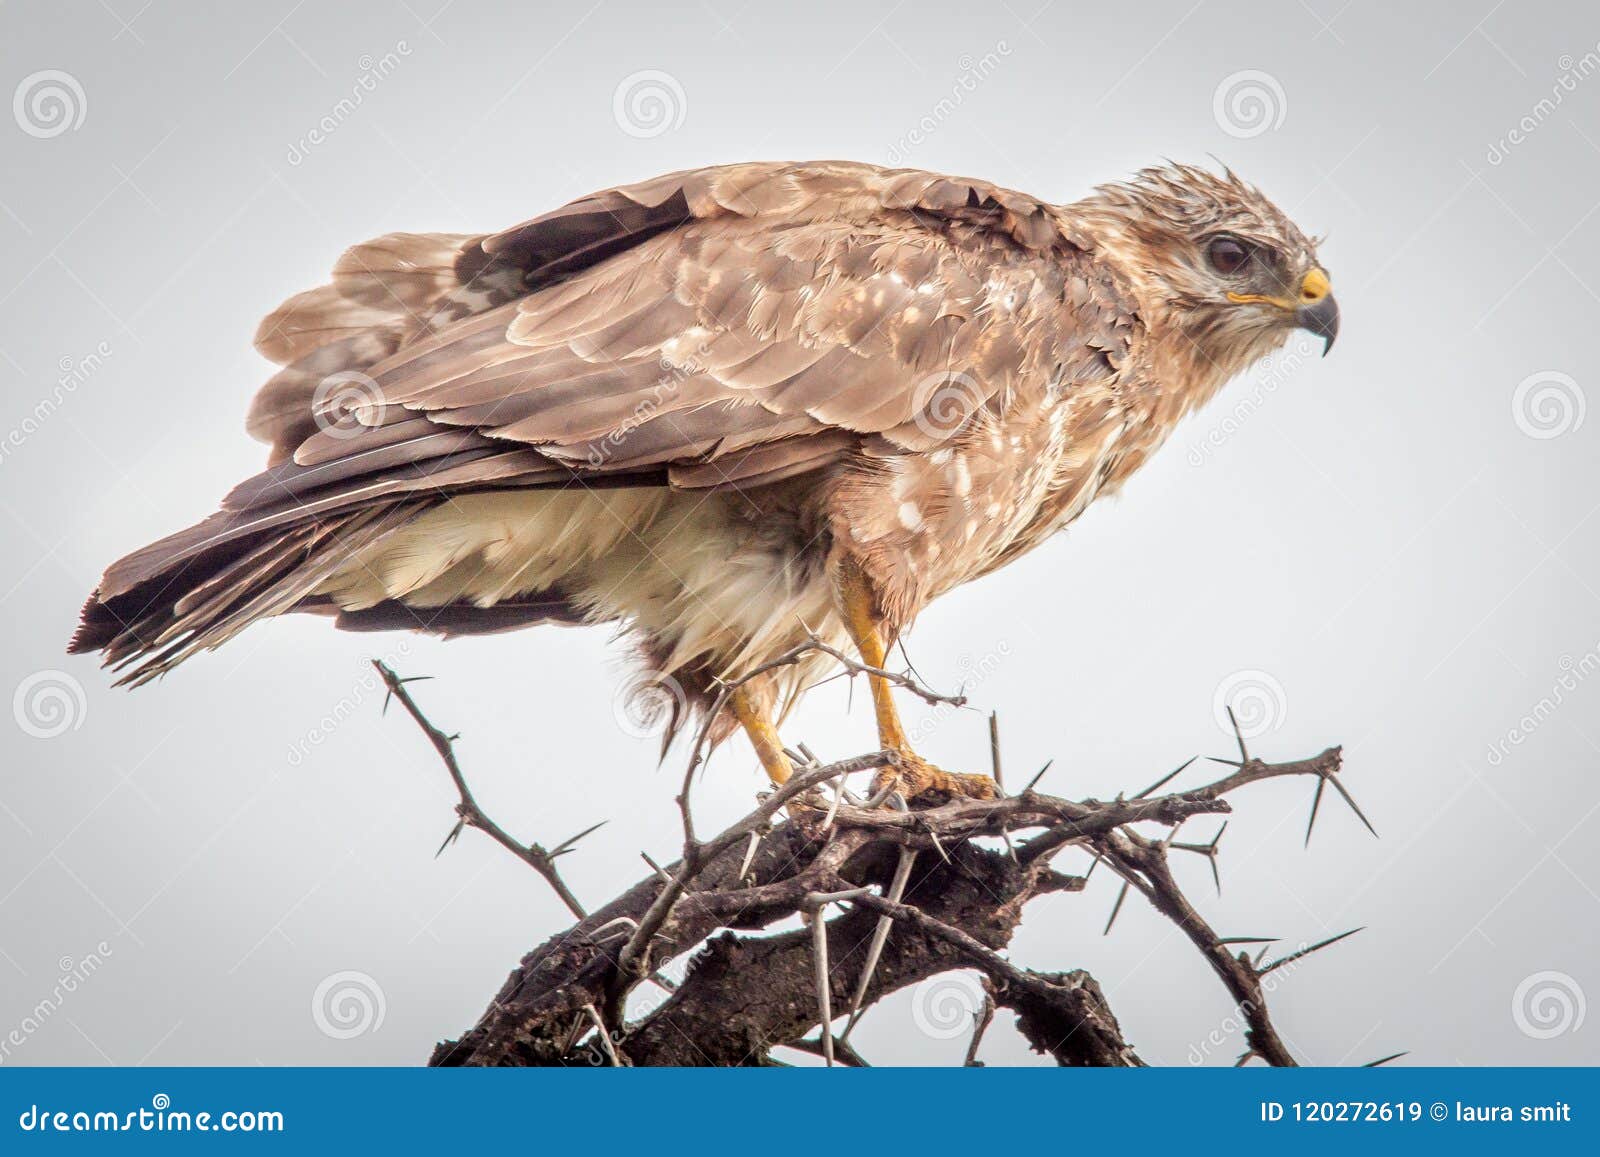 Steppe Buzzard in a Thorn Tree Stock Image - Image of thorn, feathers ...